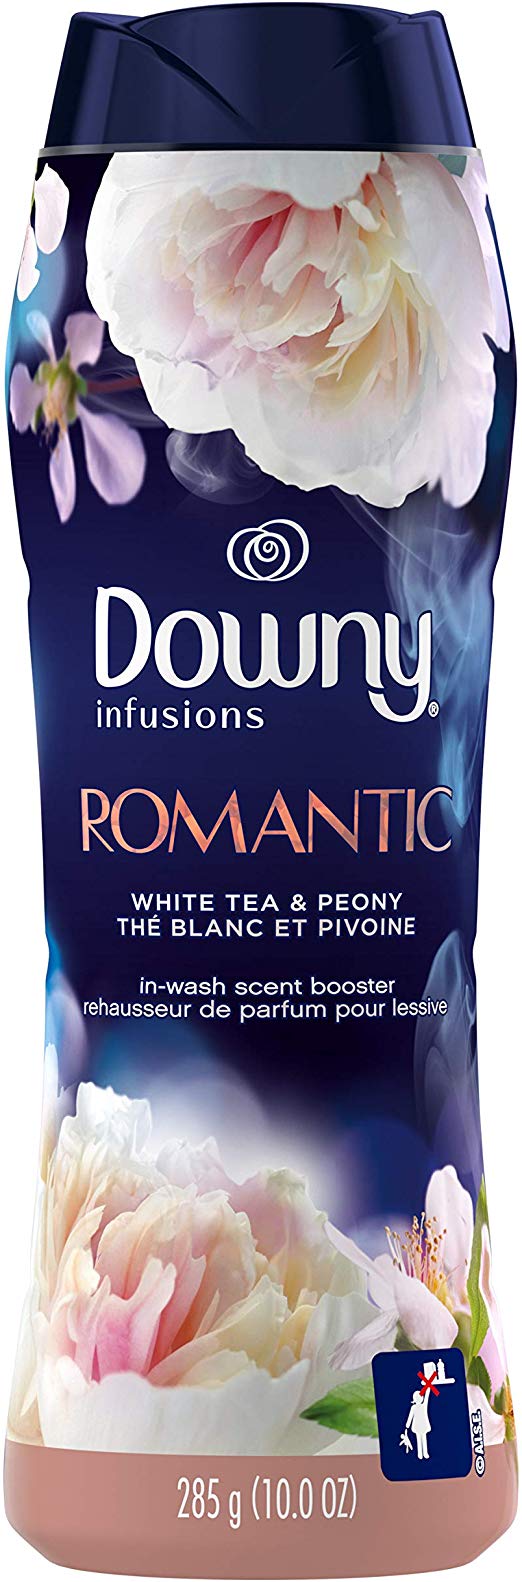 Downy Infusions in-Wash Scent Booster Beads, Romantic, White Tea & Peony, 10 Ounce, 4 Count